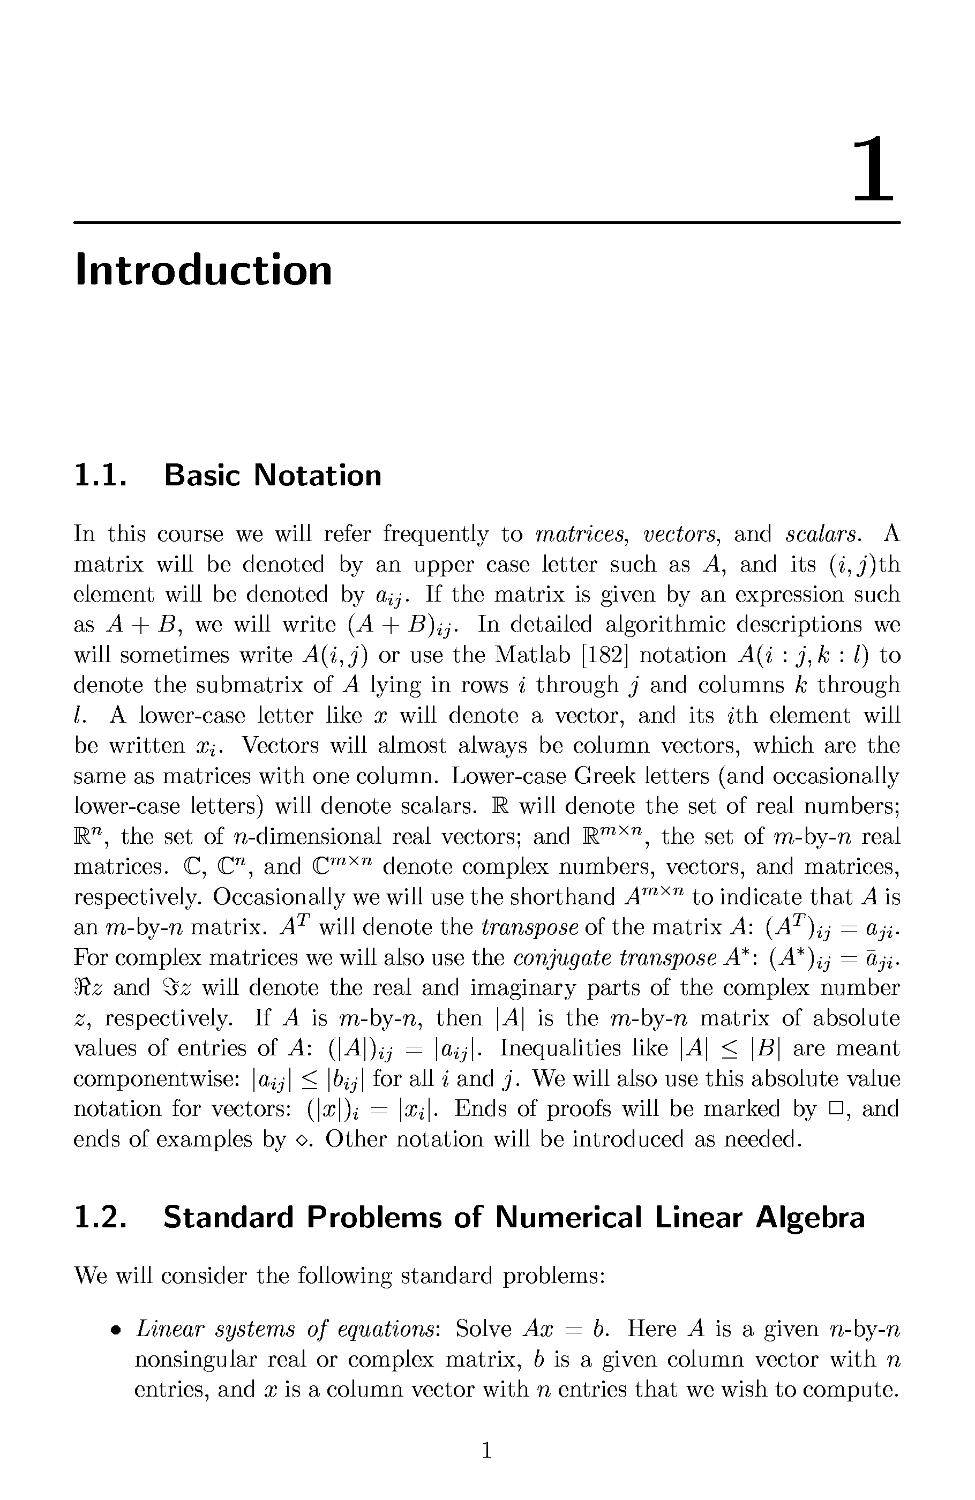 1 Introduction
1.2 Standard Problems of Numerical Linear Algebra